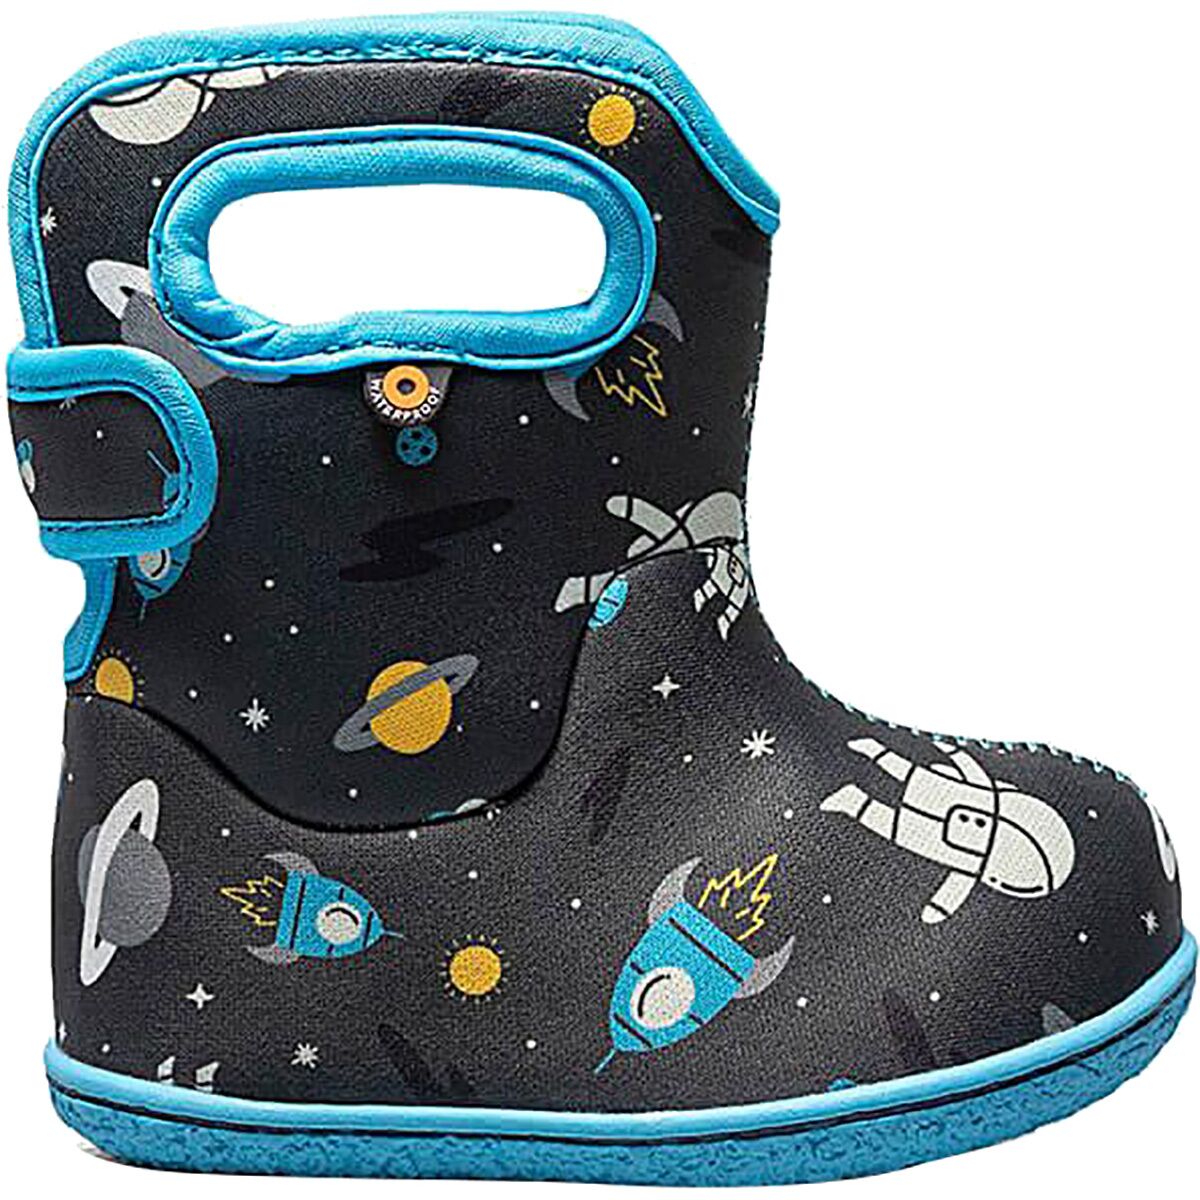 Bogs Baby Bogs Space Man Boot - Infant Boys'